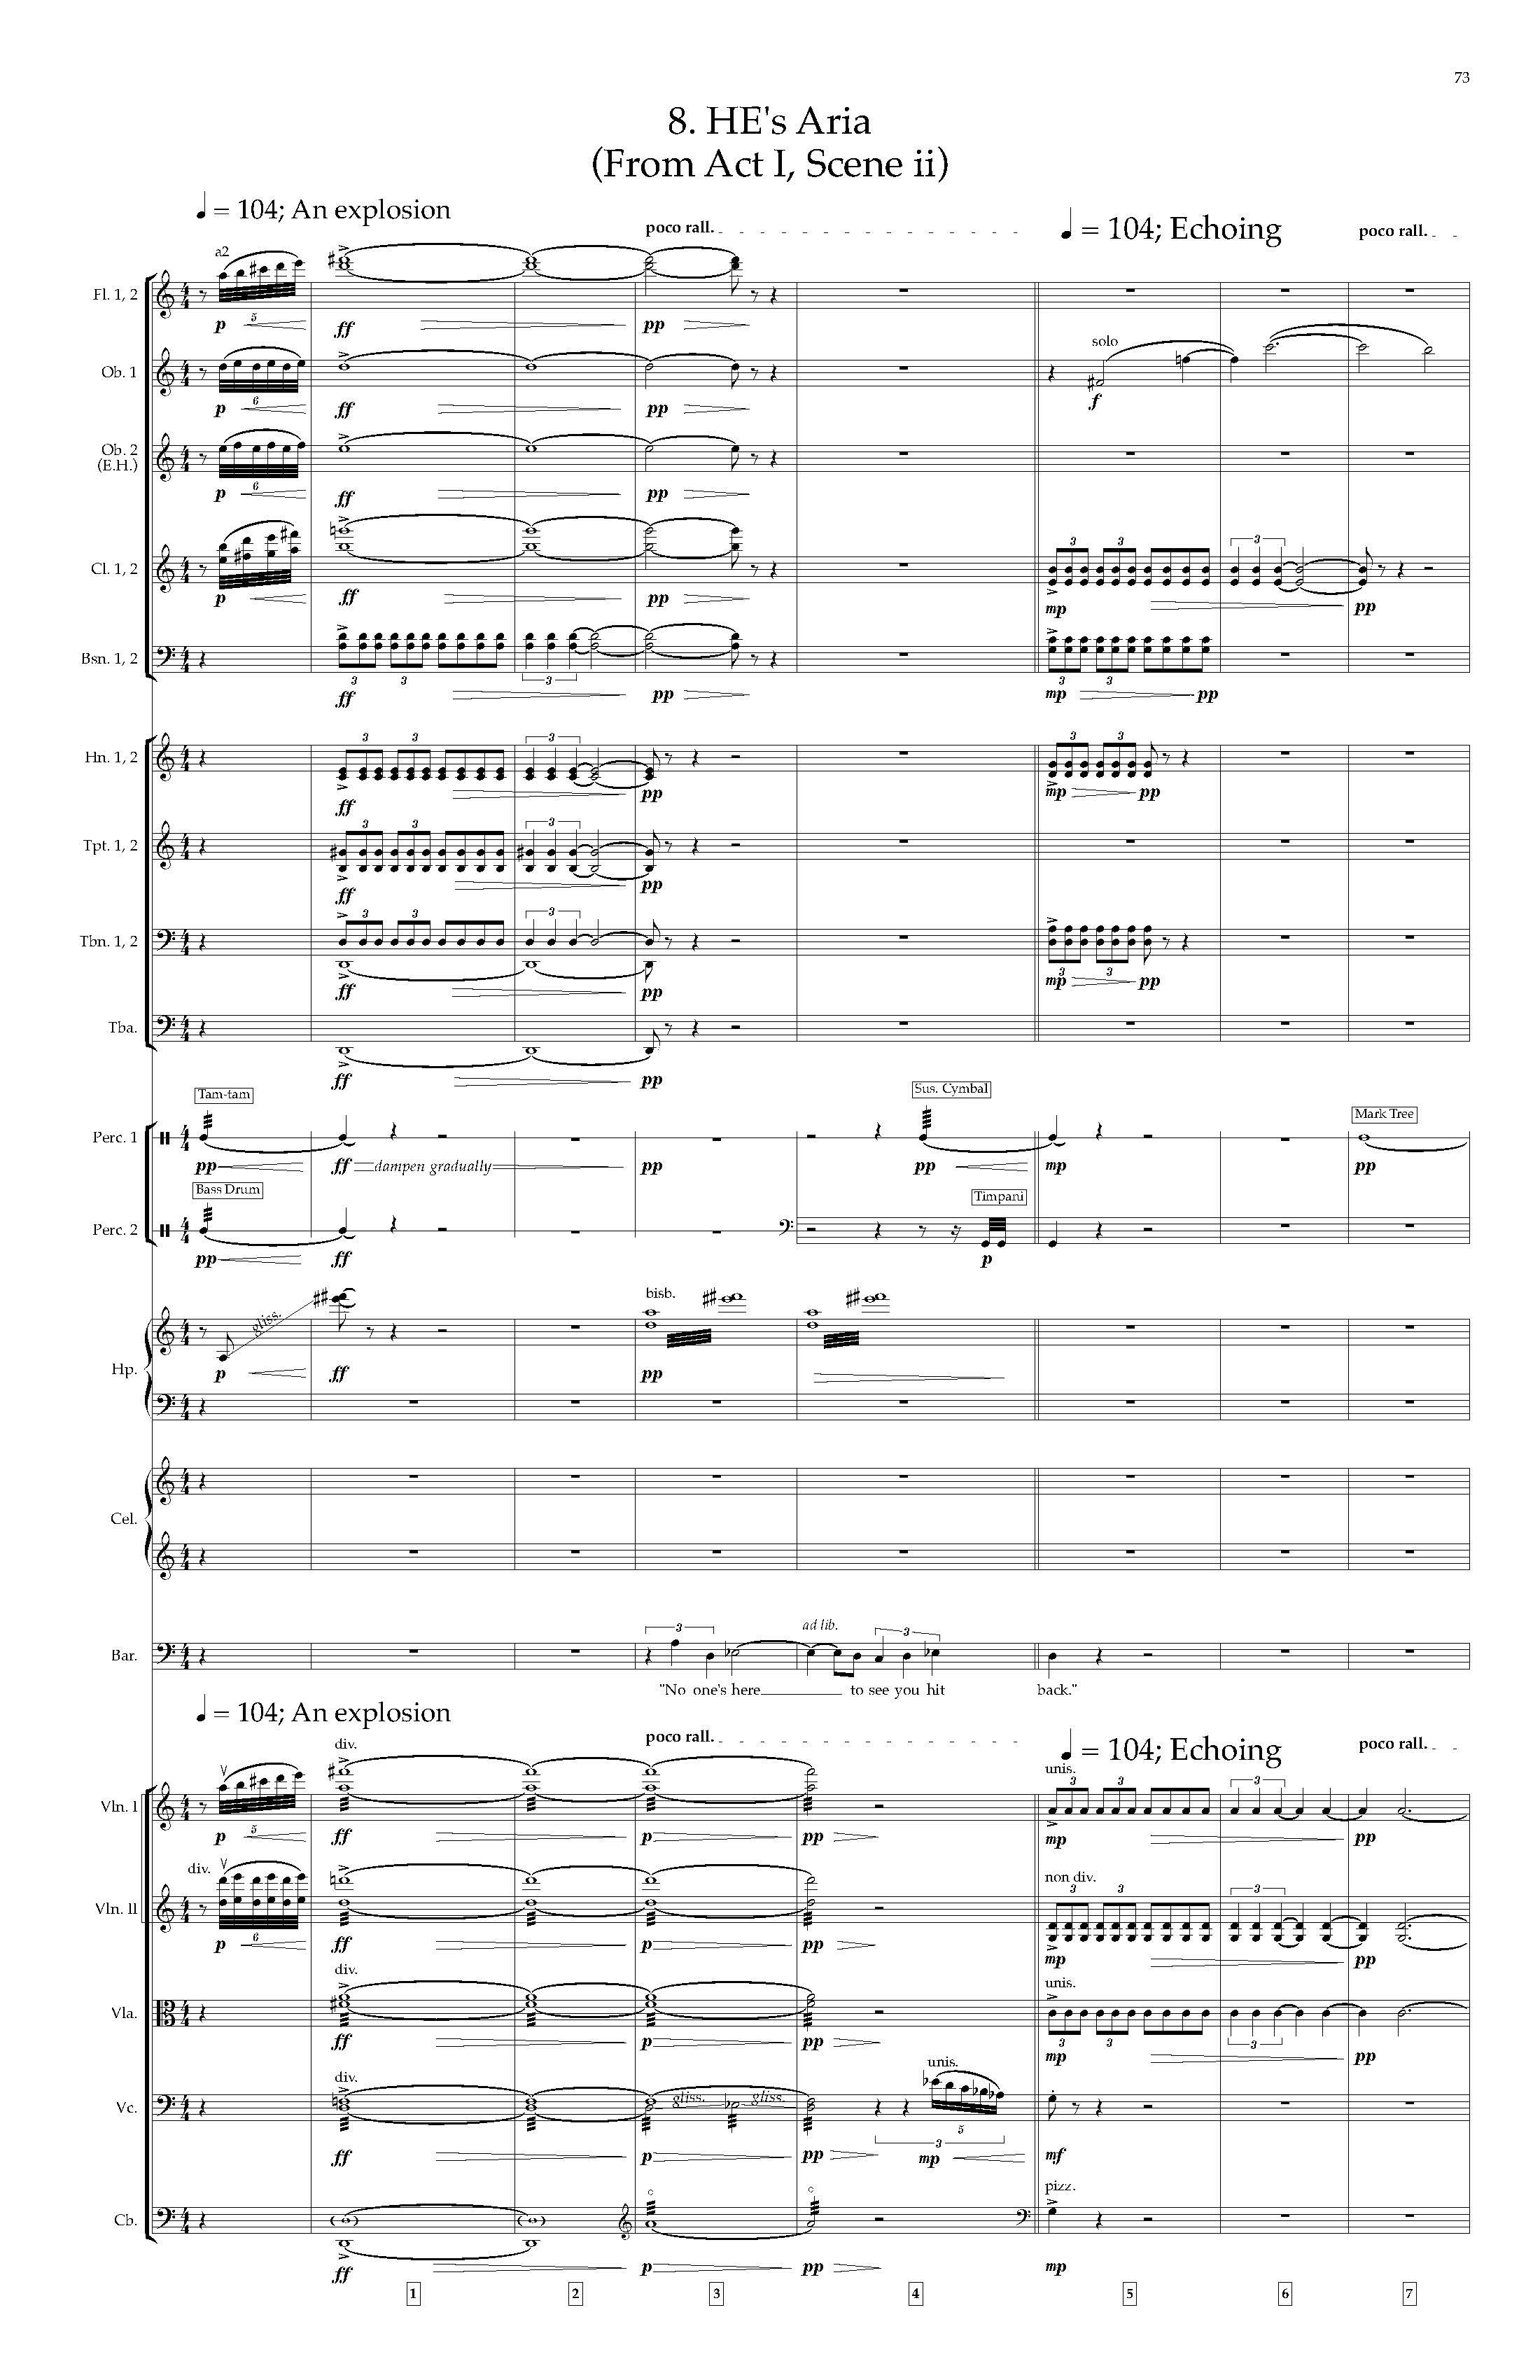 Arias and Interludes from HWGS - Complete Score_Page_79.jpg